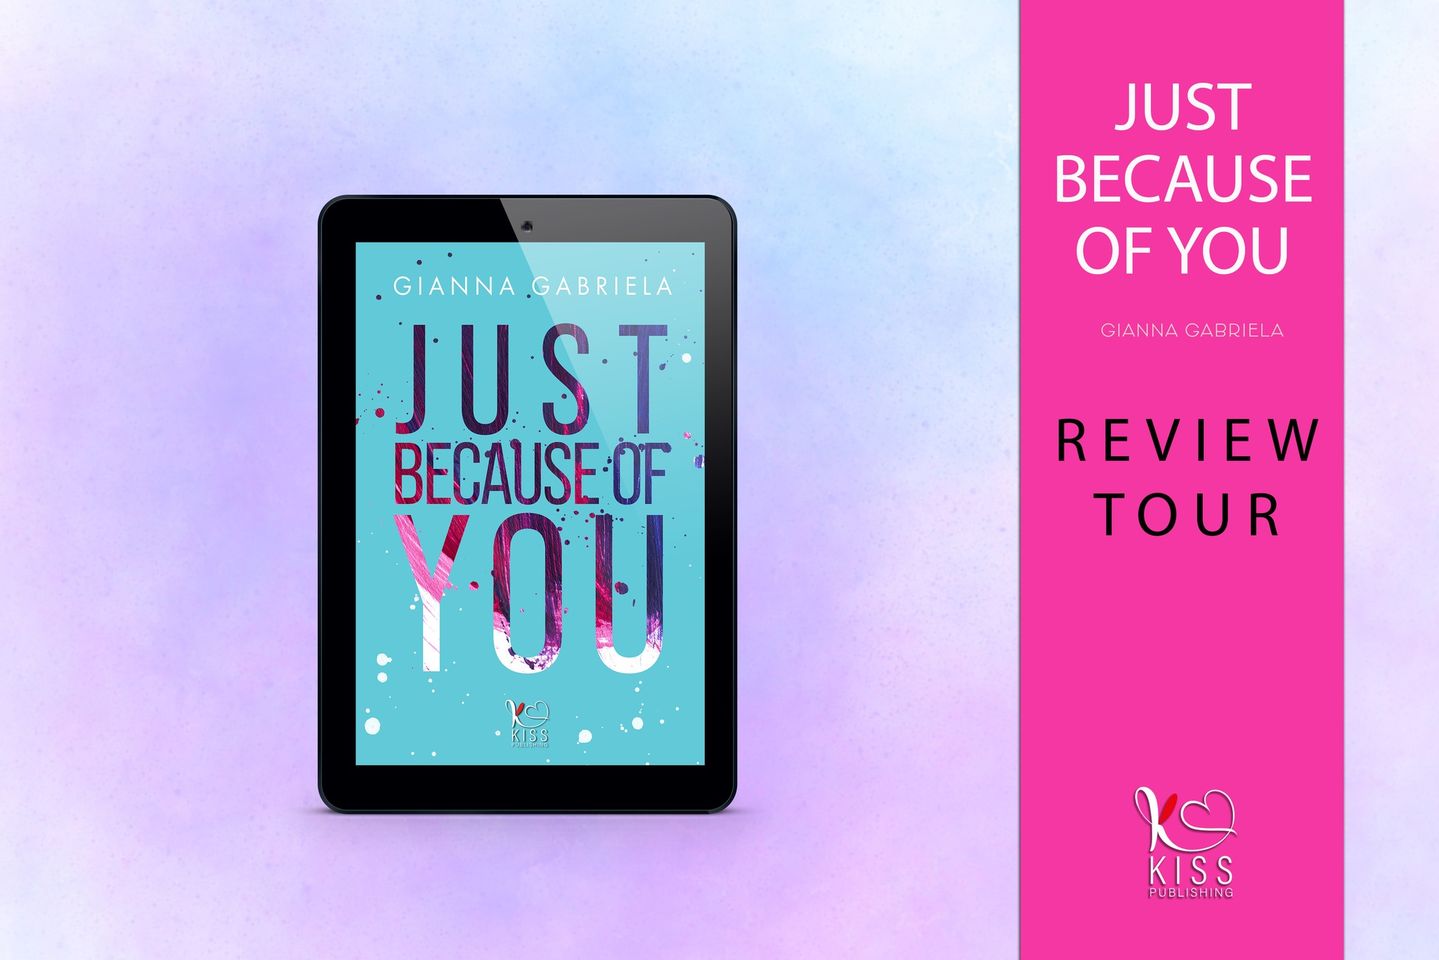 just because of you di Gianna Gabriela cover review party